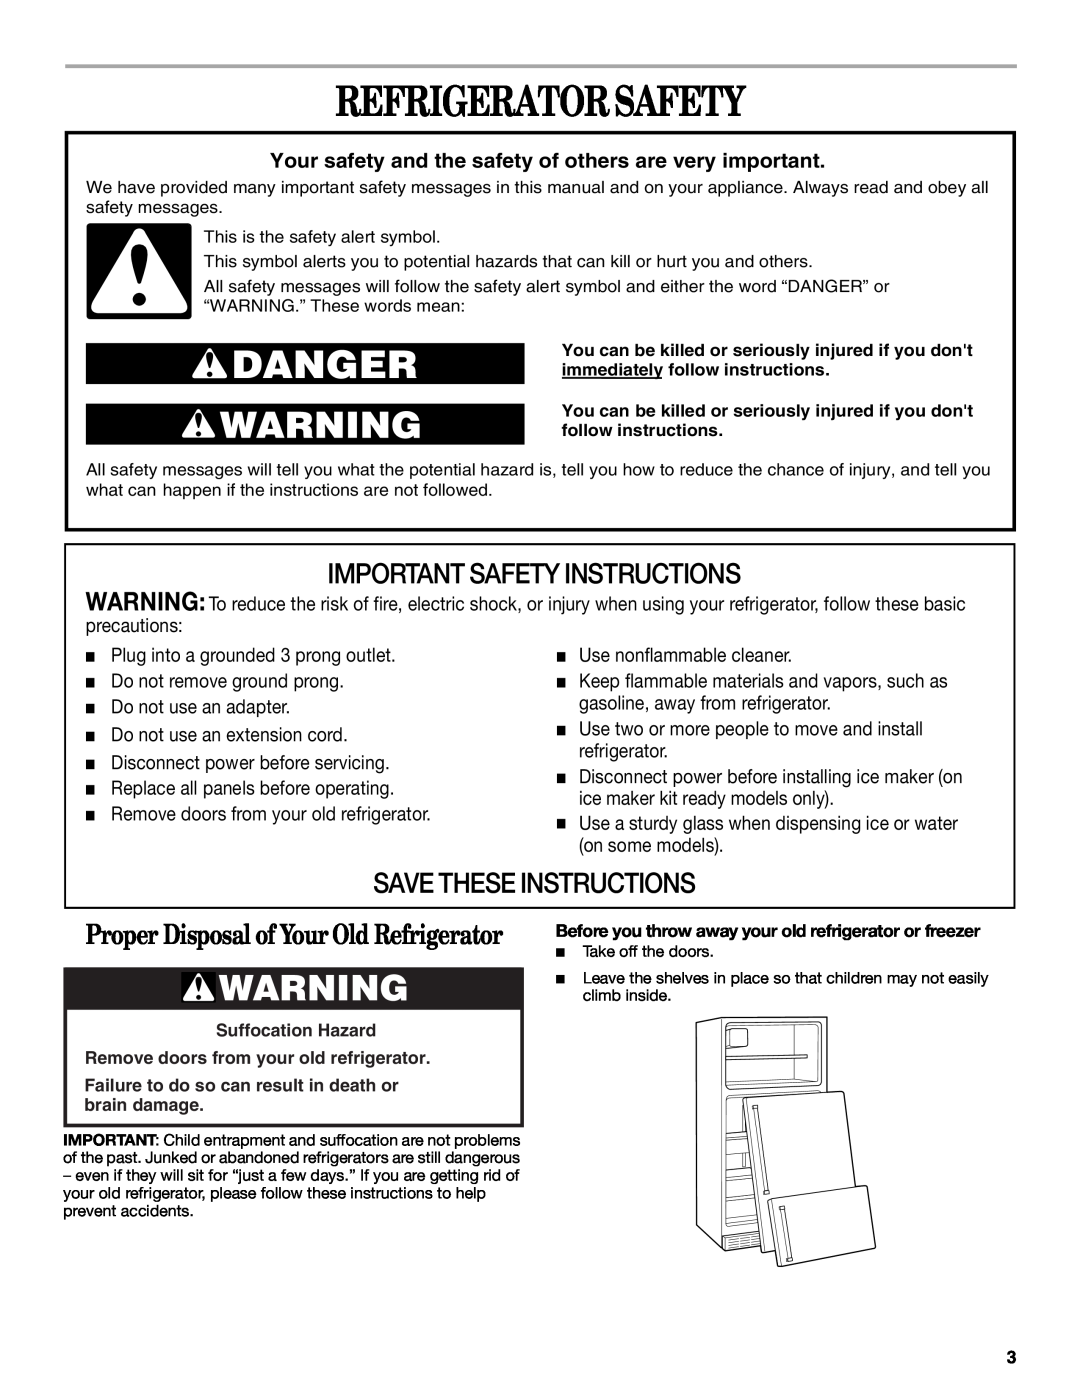 Whirlpool GR2SHTXKQ00 manual Refrigerator Safety, Proper Disposal of Your Old Refrigerator, Important Safety Instructions 